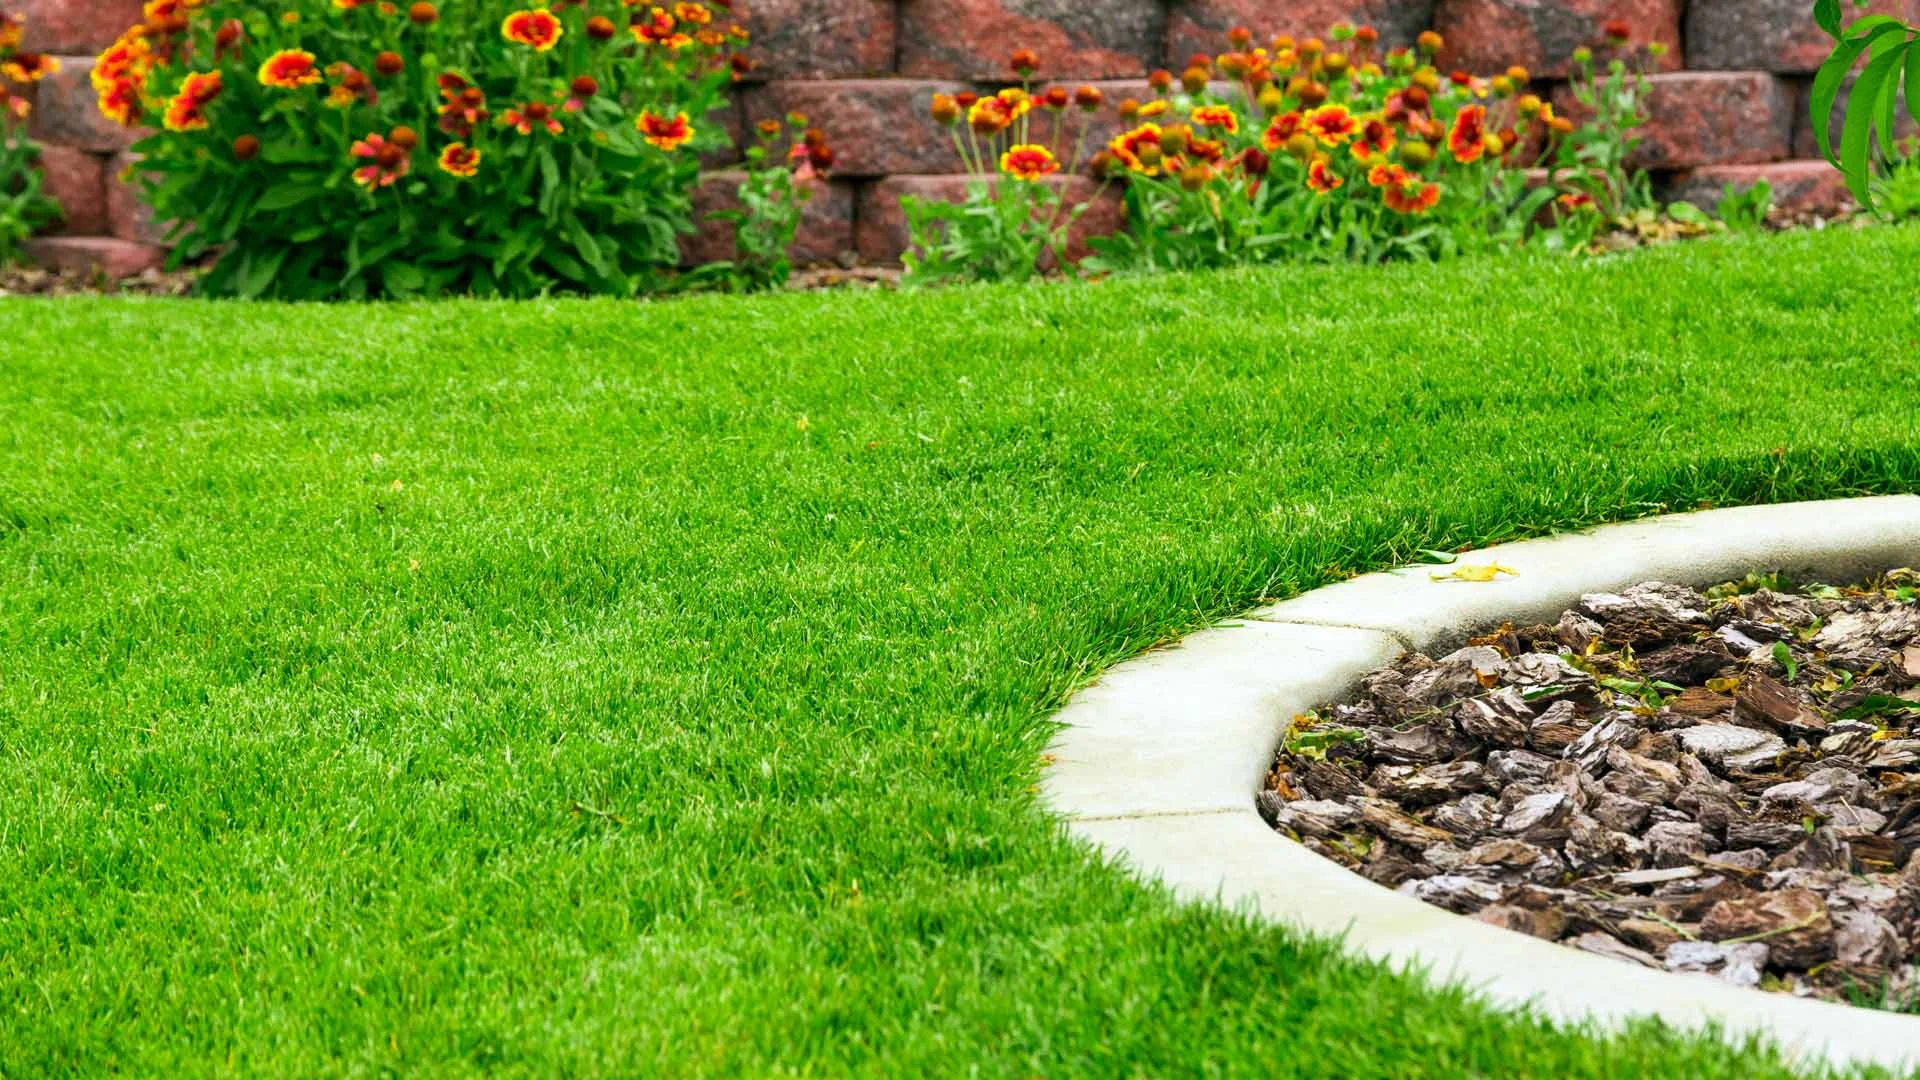 Lawn Fertilization and Weed Control Services in Gillette NJ